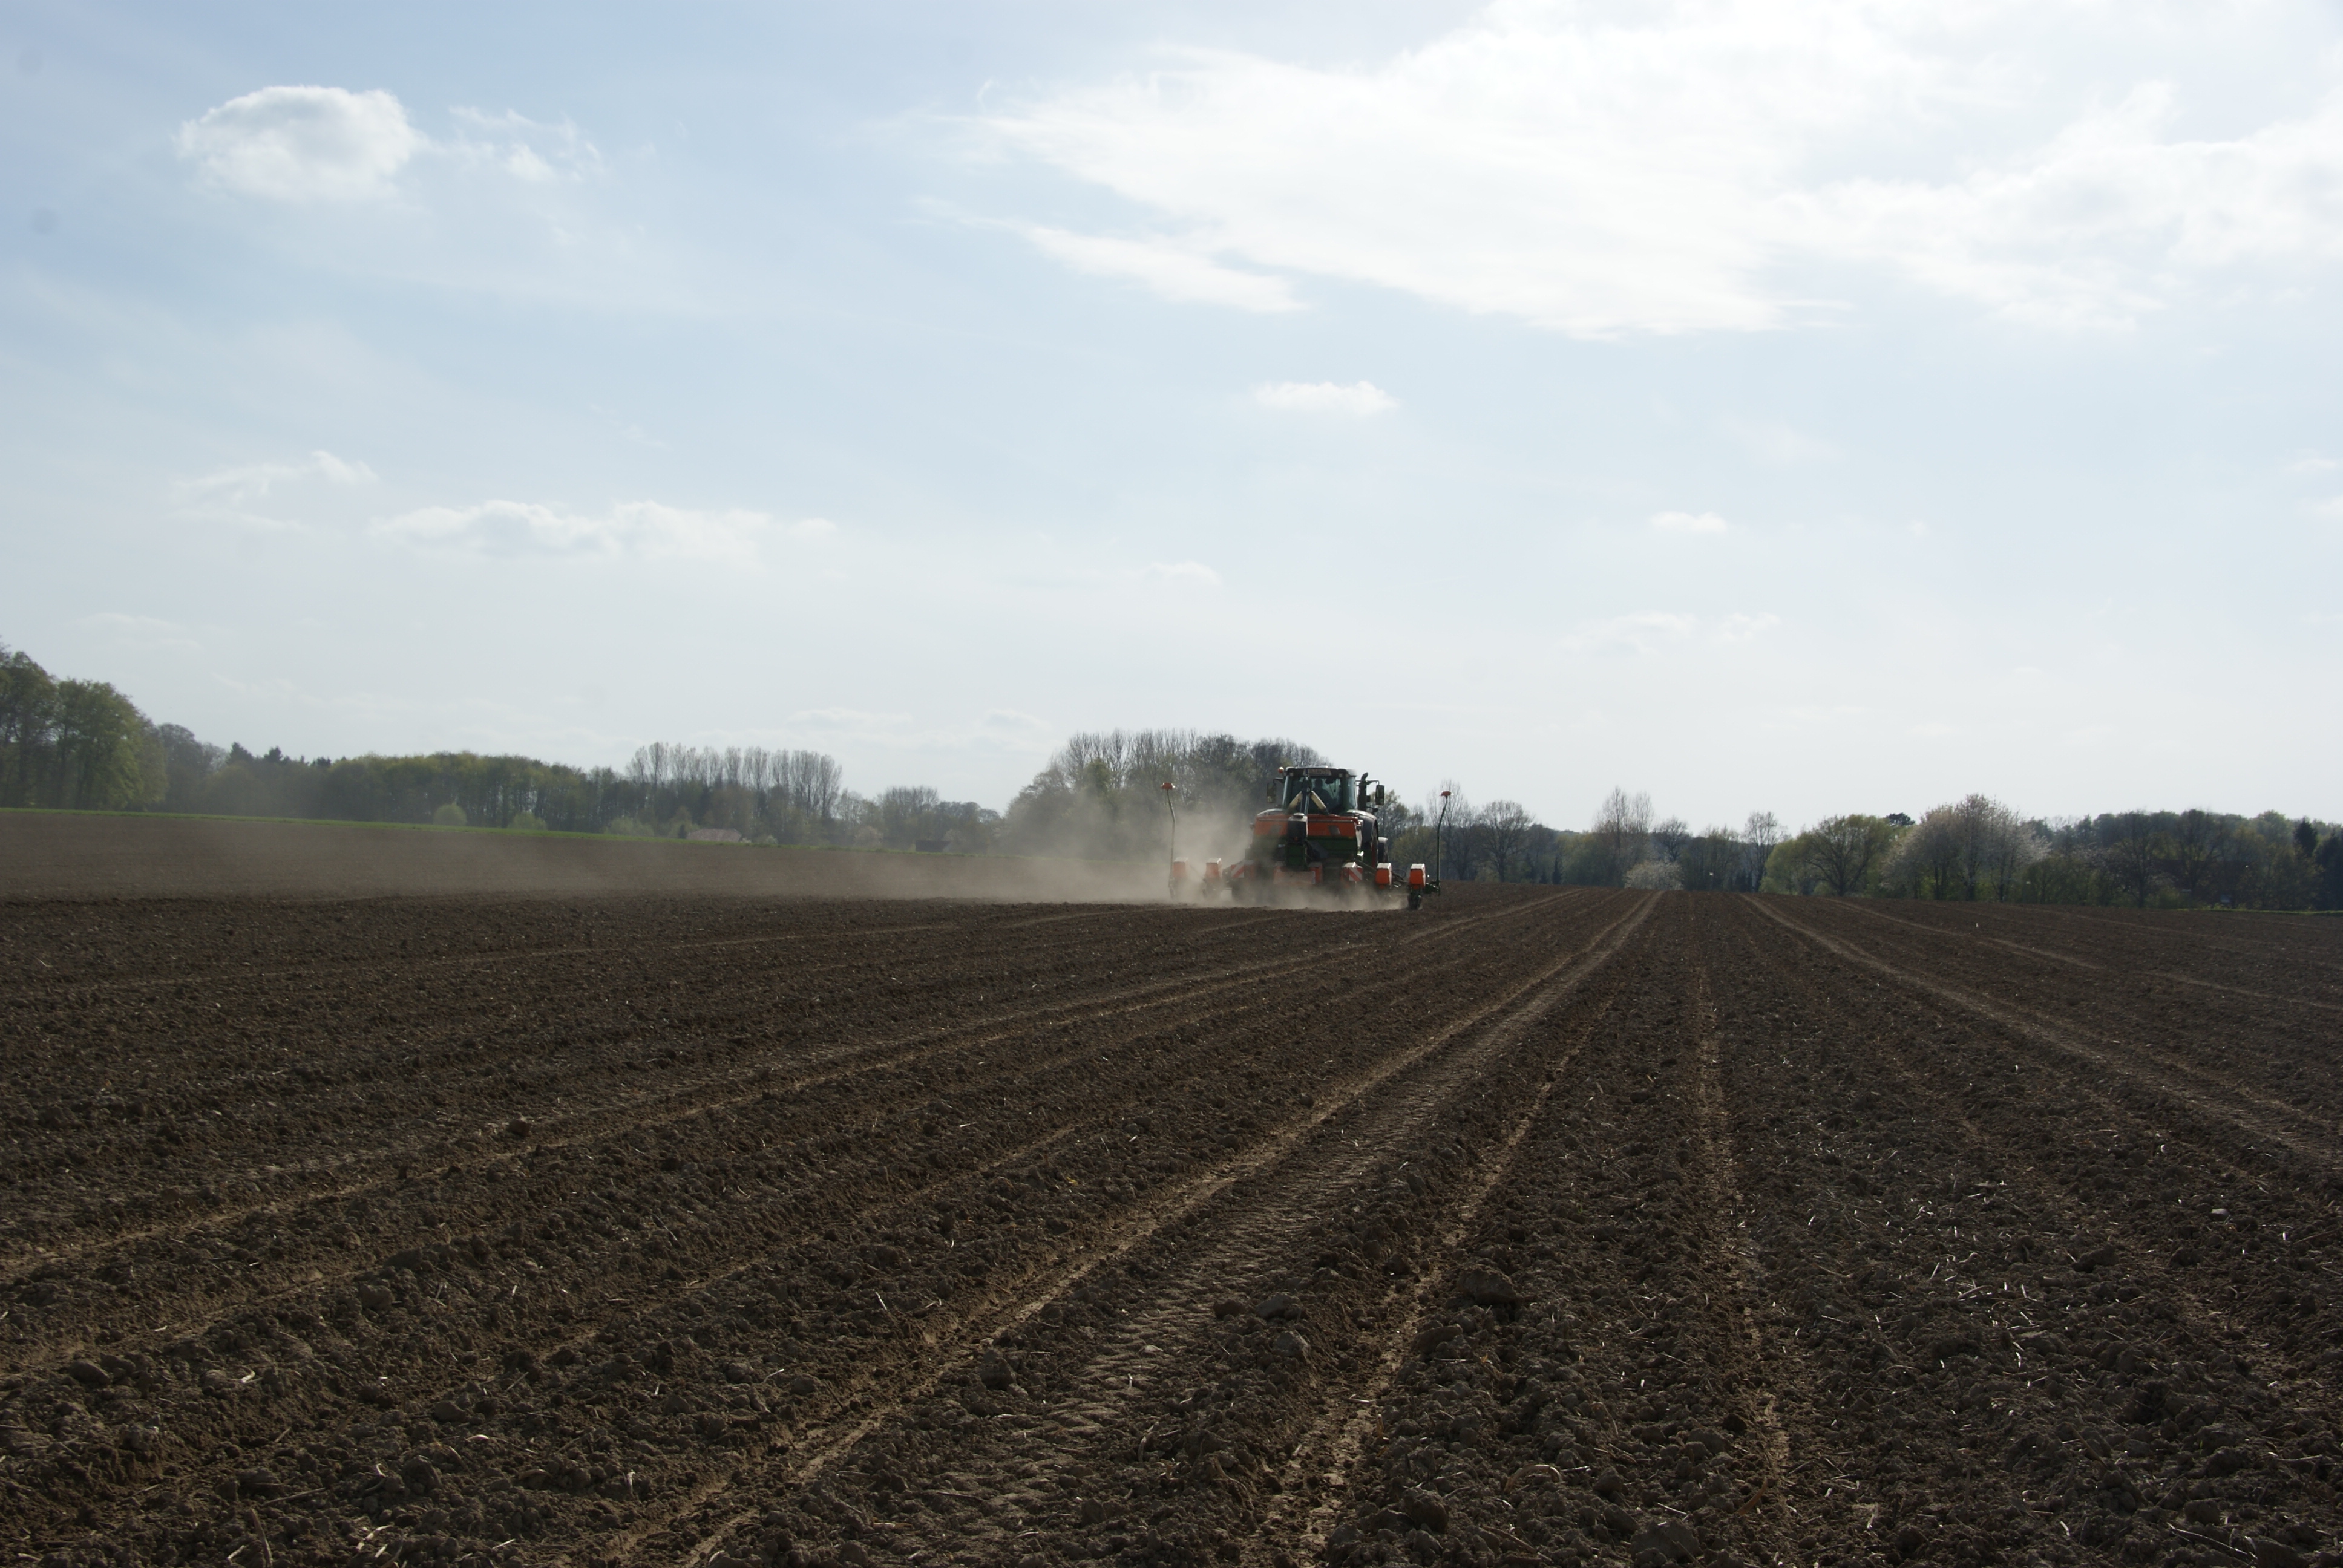 Sowing corn in the field using agricultural machinery. Seeding corn, planting corn